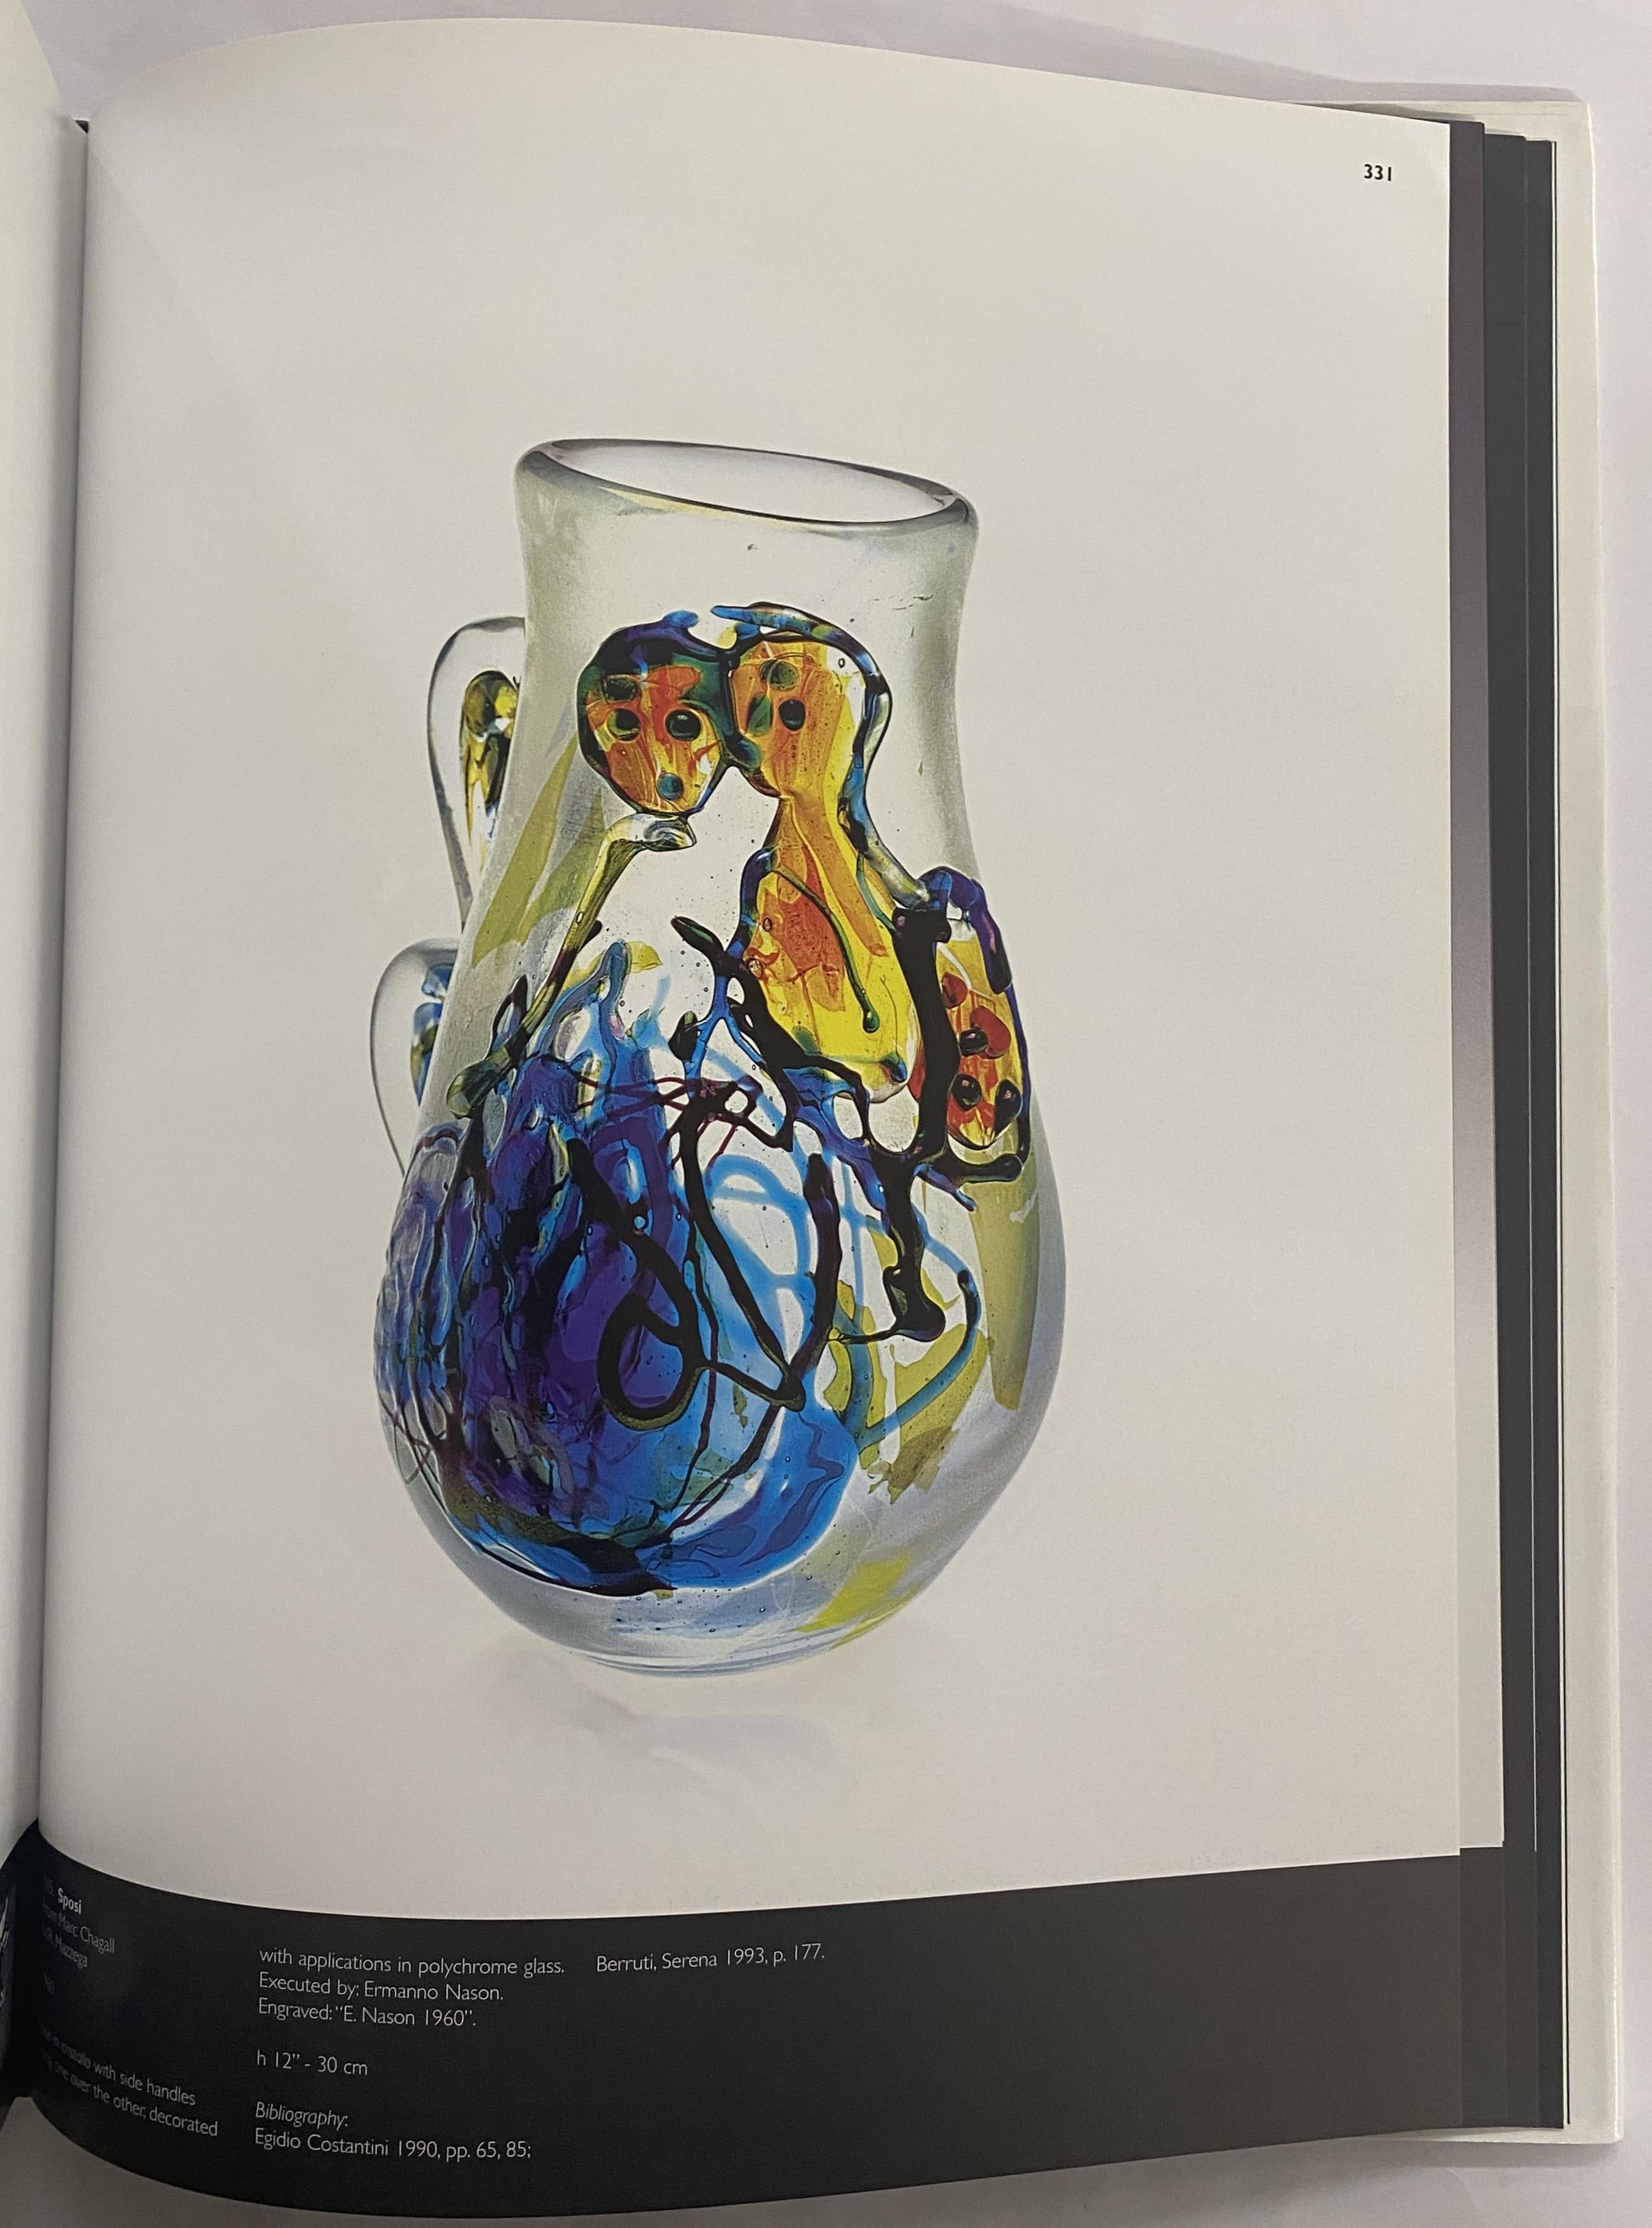 Rare glass objects from the latter half of the nineteenth century illustrate the beginnings of the effort to revive art glass production in Murano. Magnificent examples of murrine represent the early nineteenth century, some of them with designs by